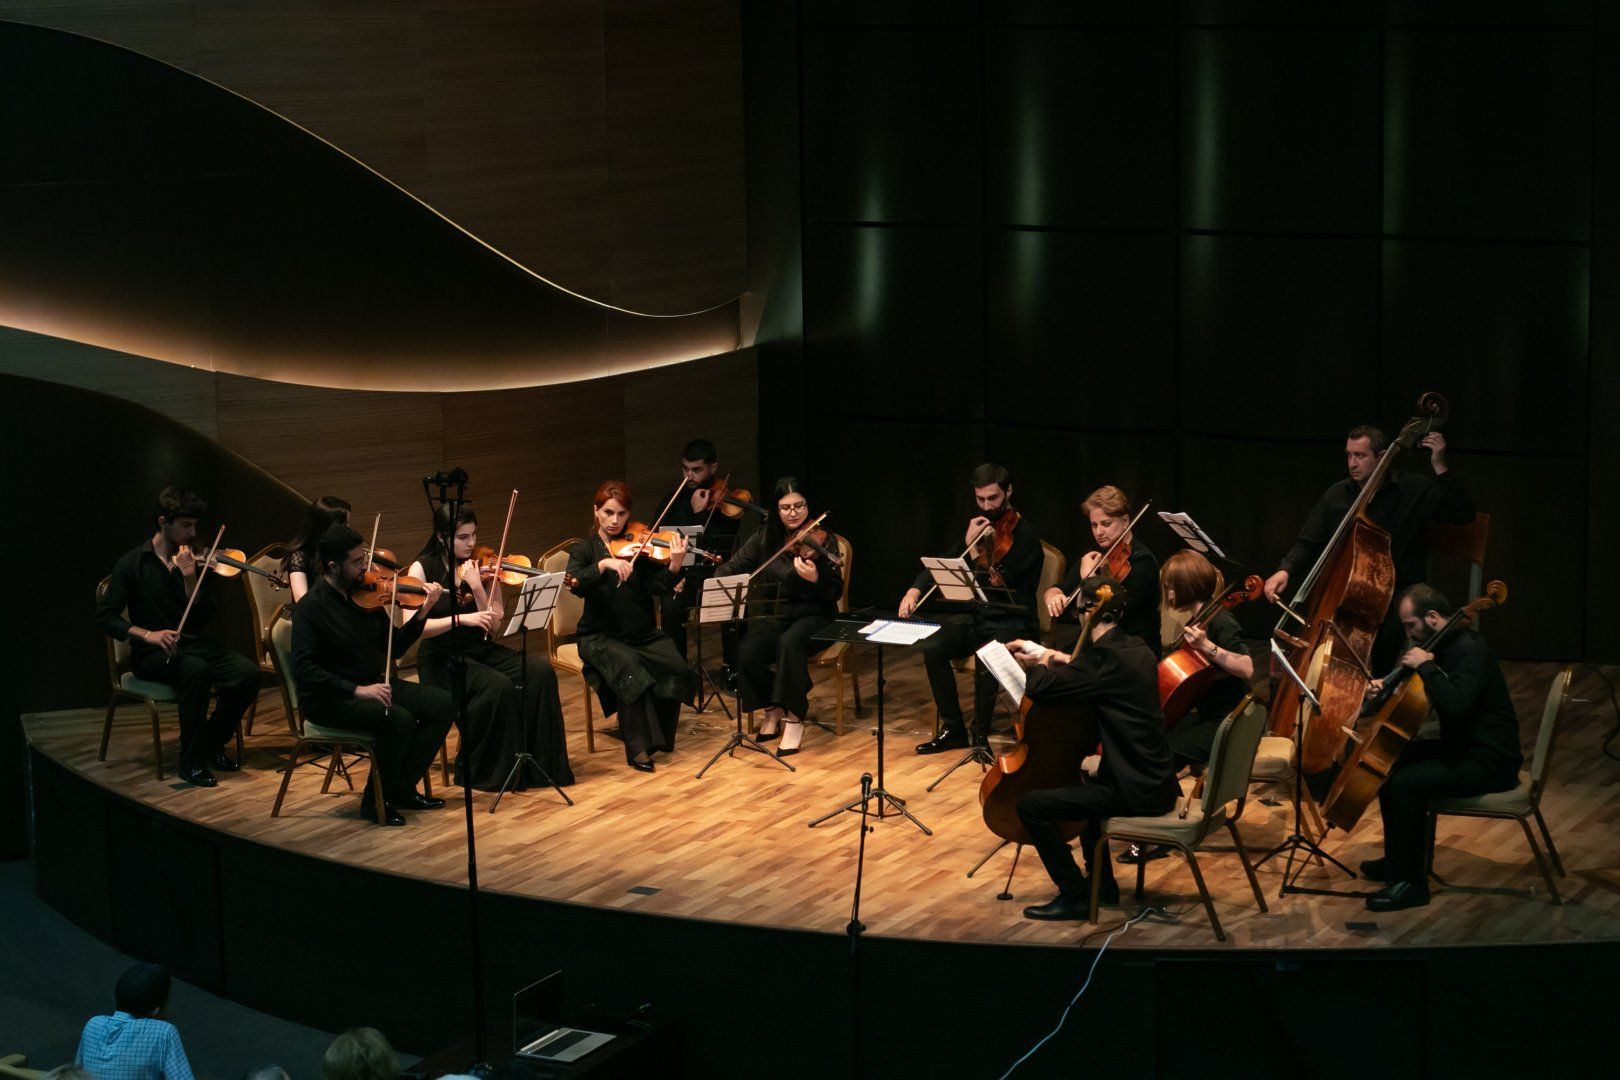 Cadenza Orchestra stuns audience with music by renown composer [PHOTOS/VIDEO]